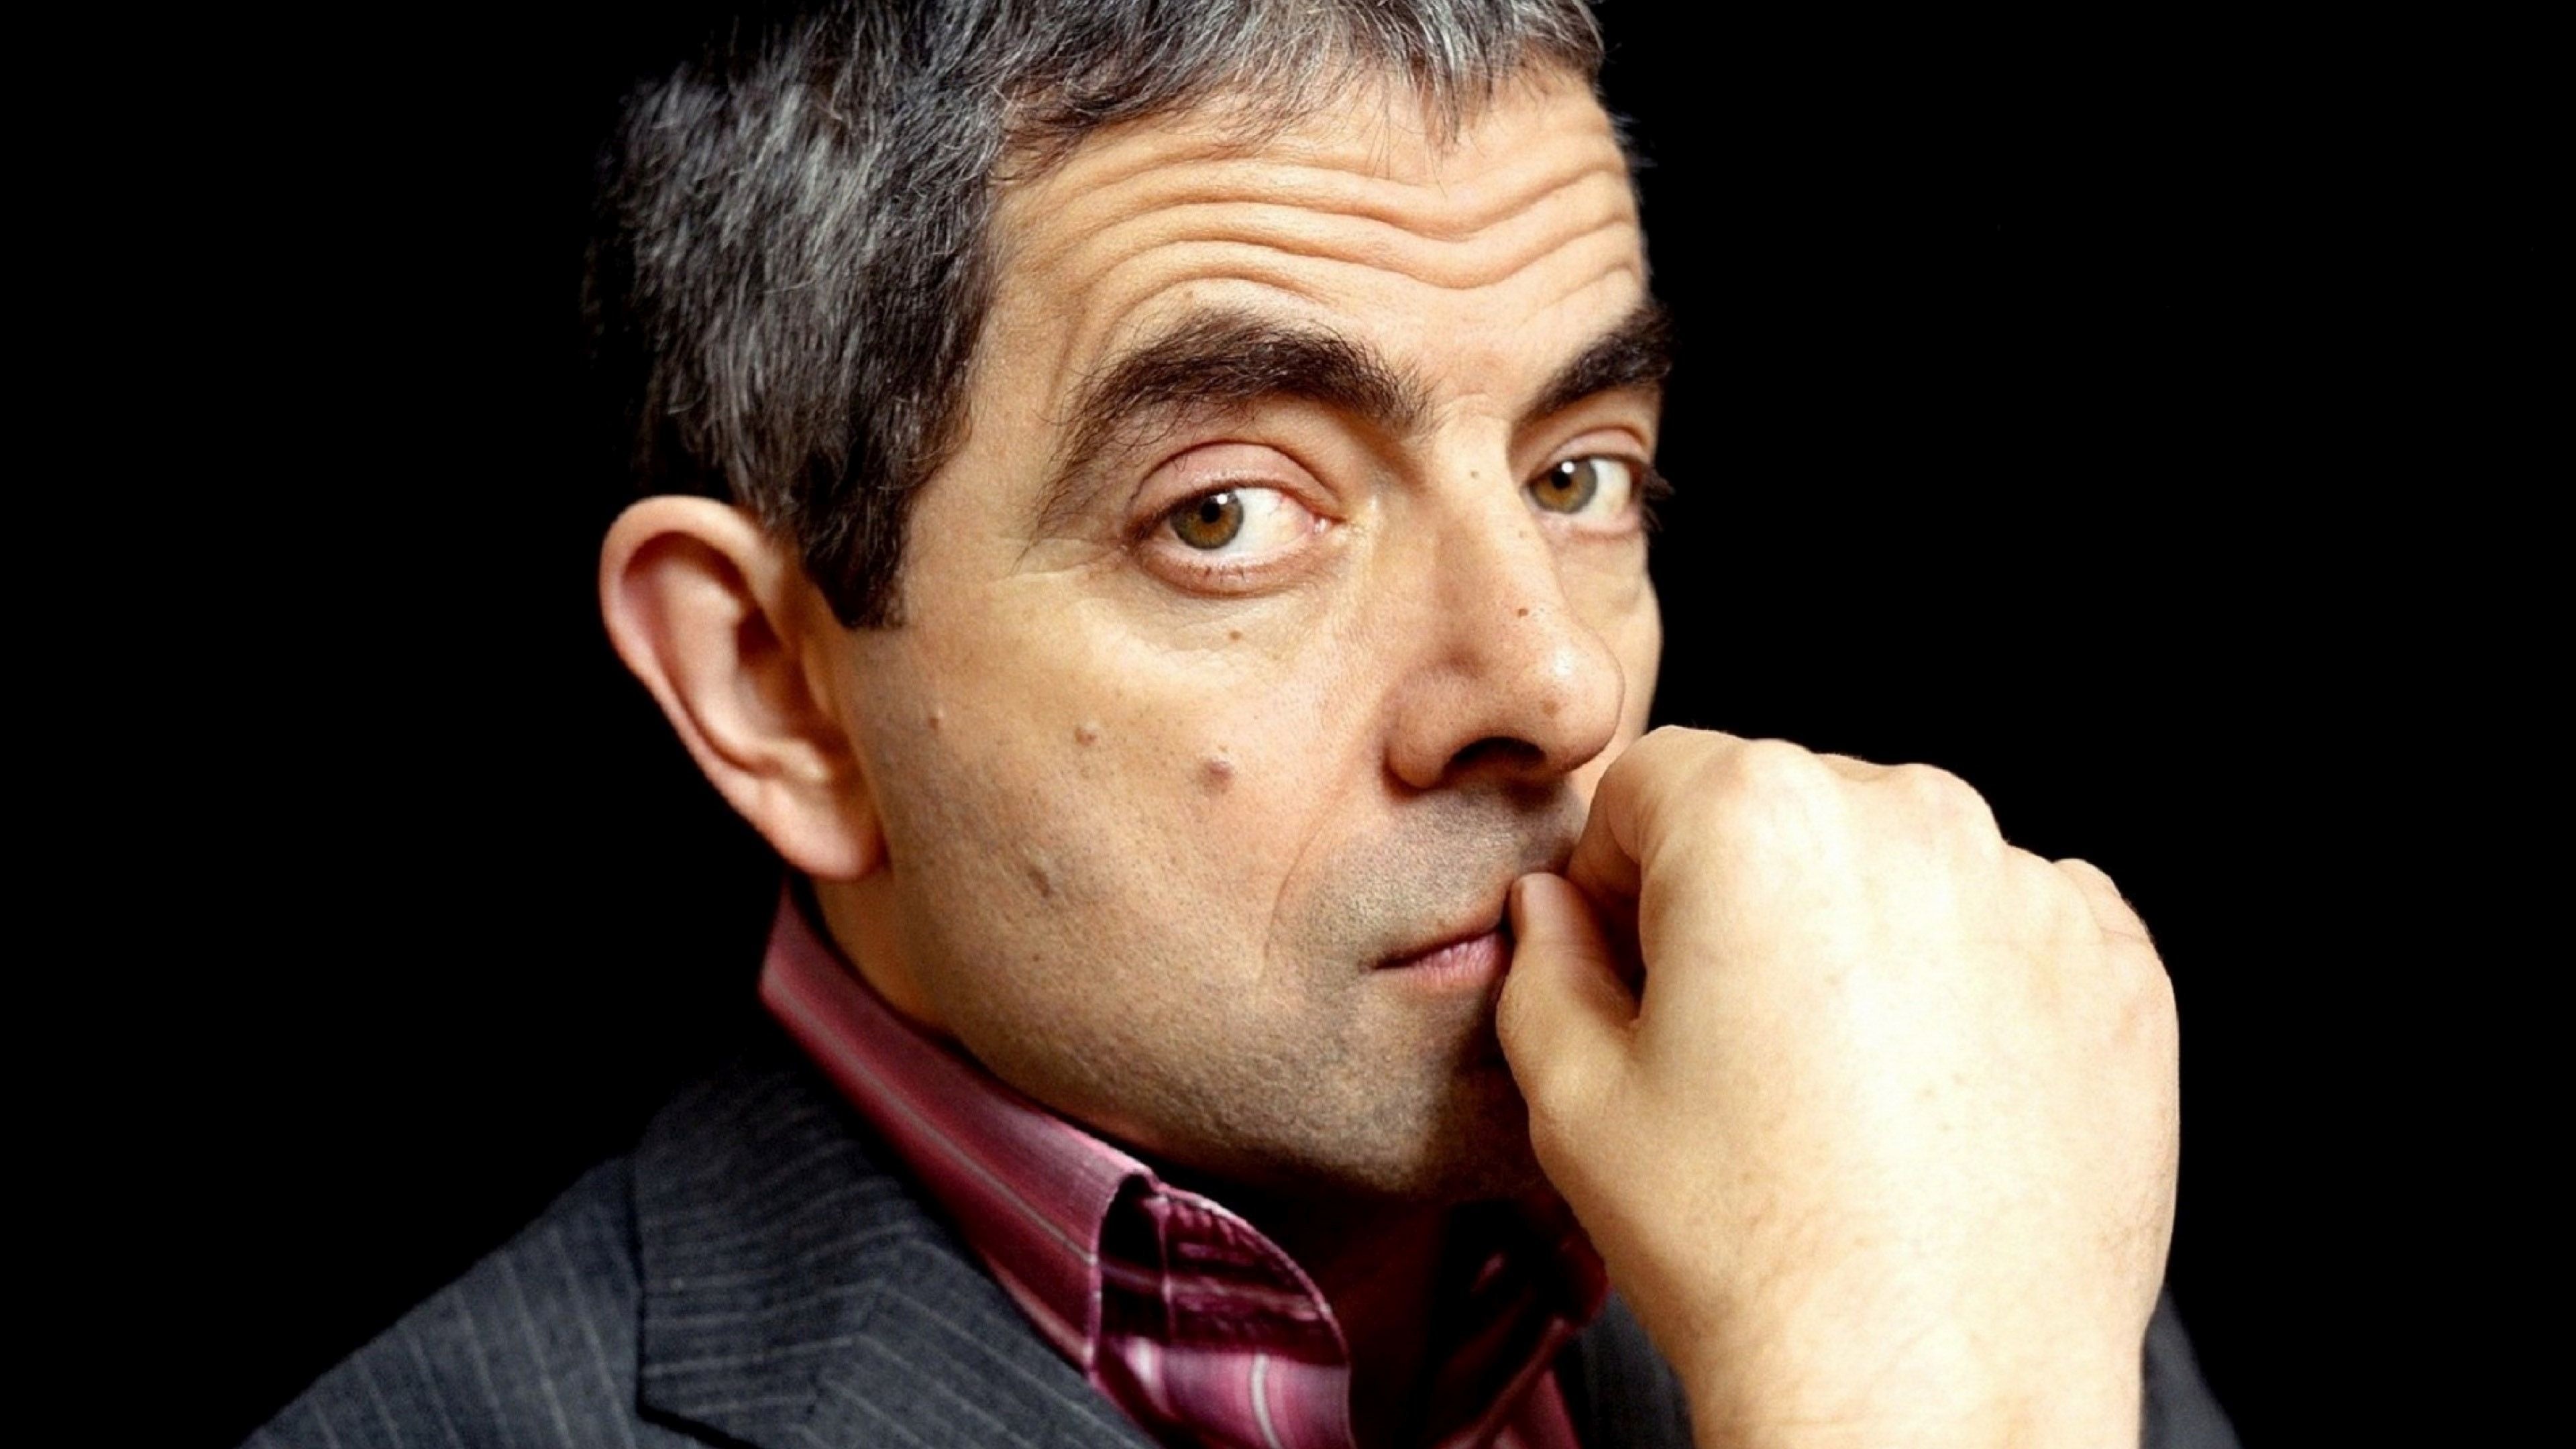 Rowan Atkinson: Received the 1981 British Academy Television Award for Best Entertainment Performance. 3840x2160 4K Background.